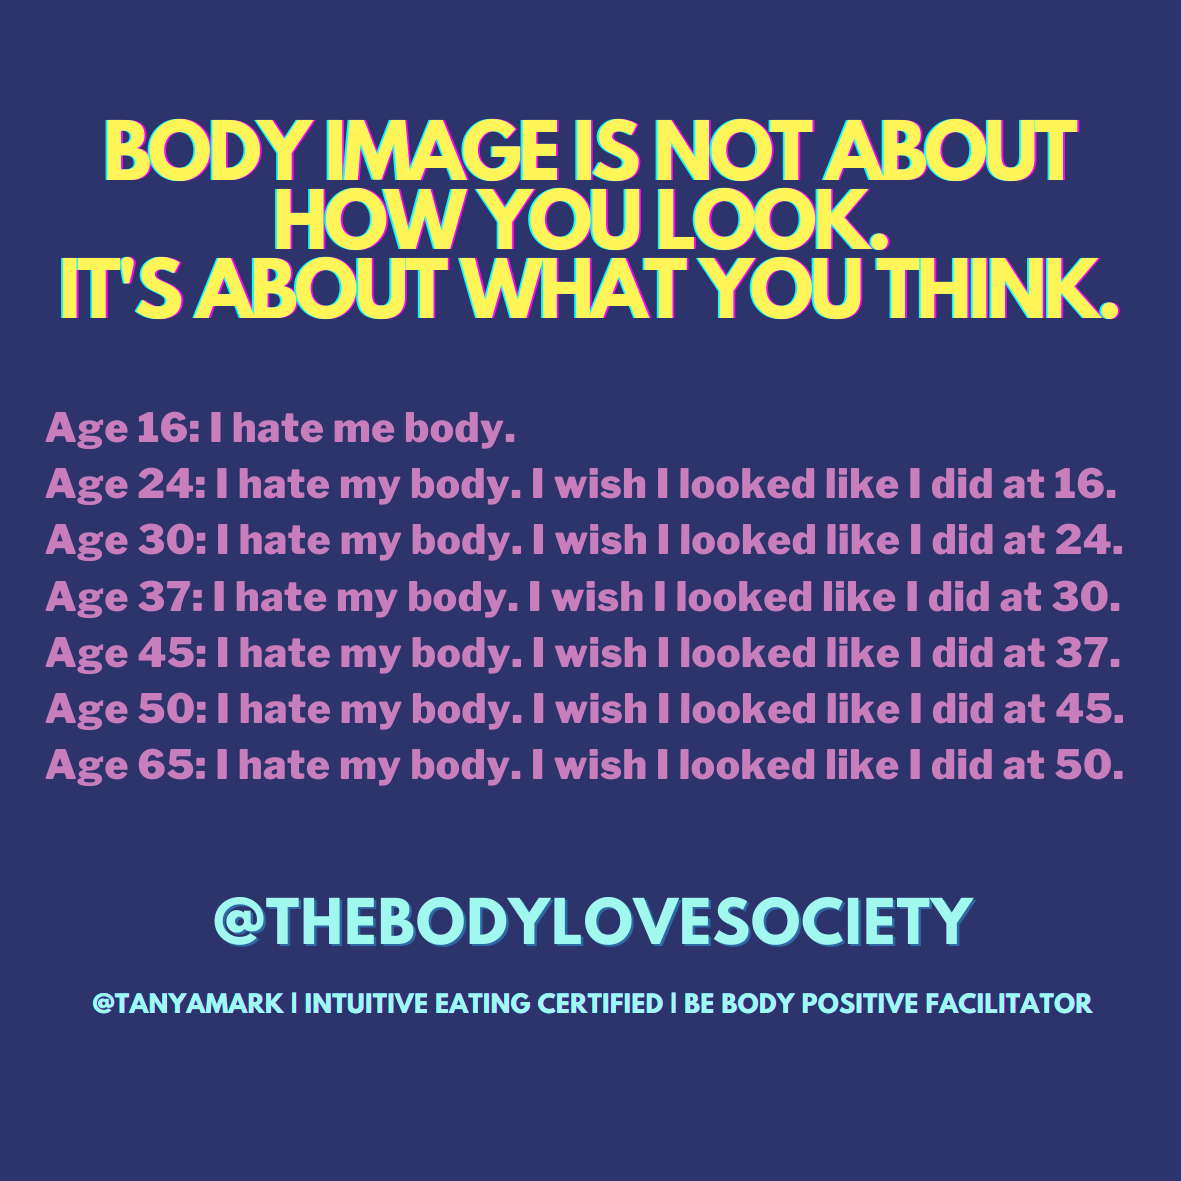 Body hate at all ages